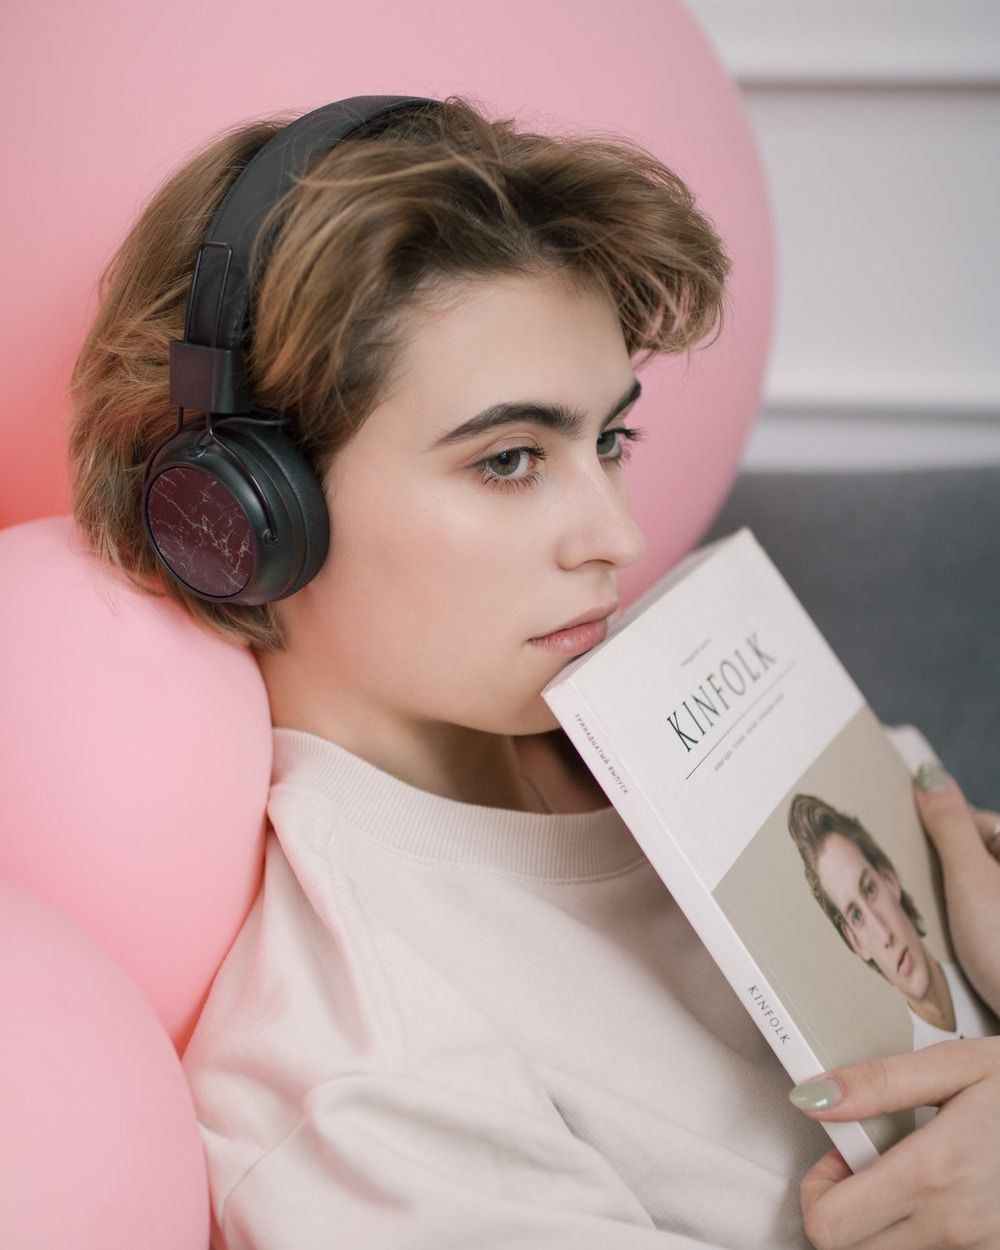 woman sitting on a pink chair wearing headphones